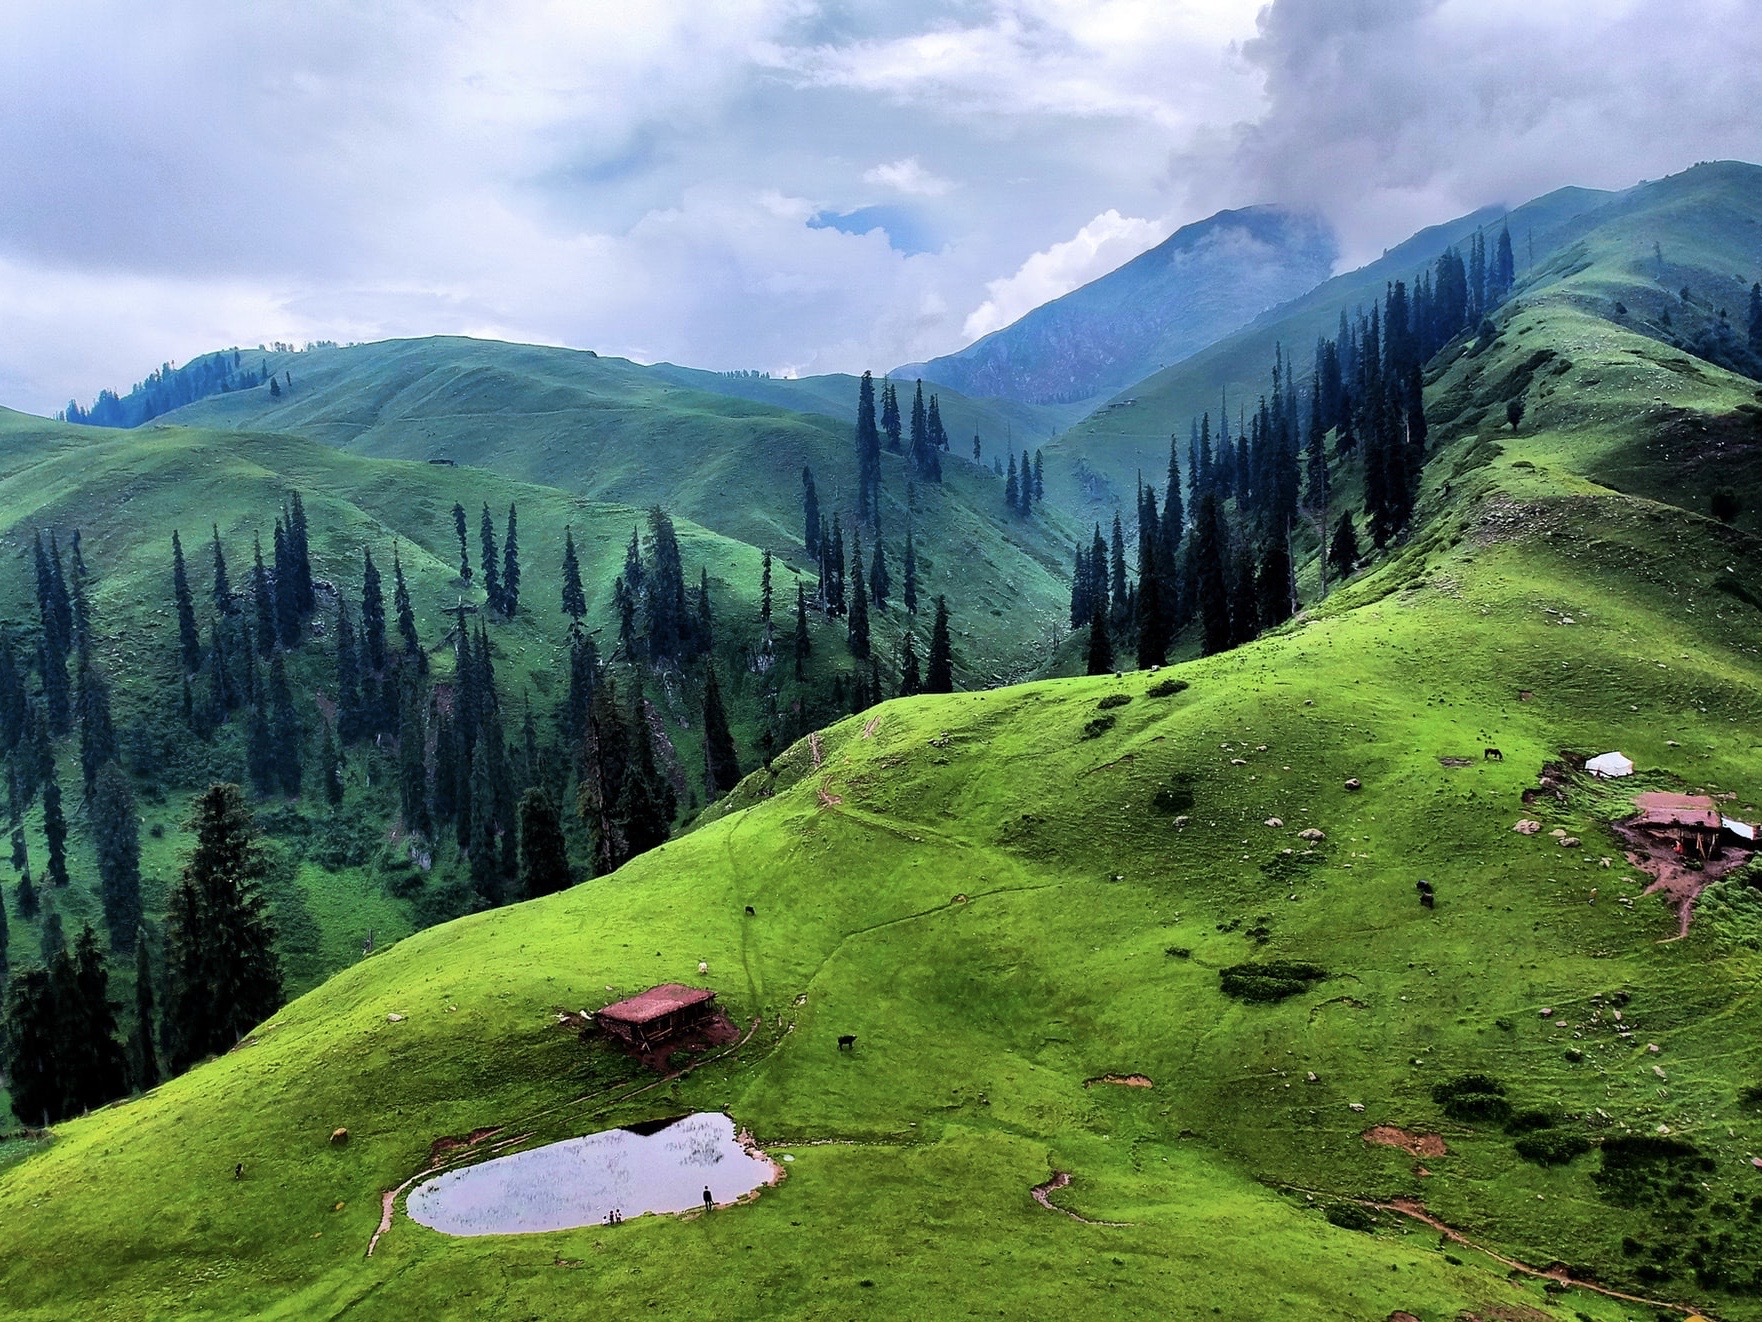 Pakistan’s economic stimulus package focused on 15 national parks will protect a diverse range of habitats, benefit both nature and people and create a pool of new jobs for unemployed youth.